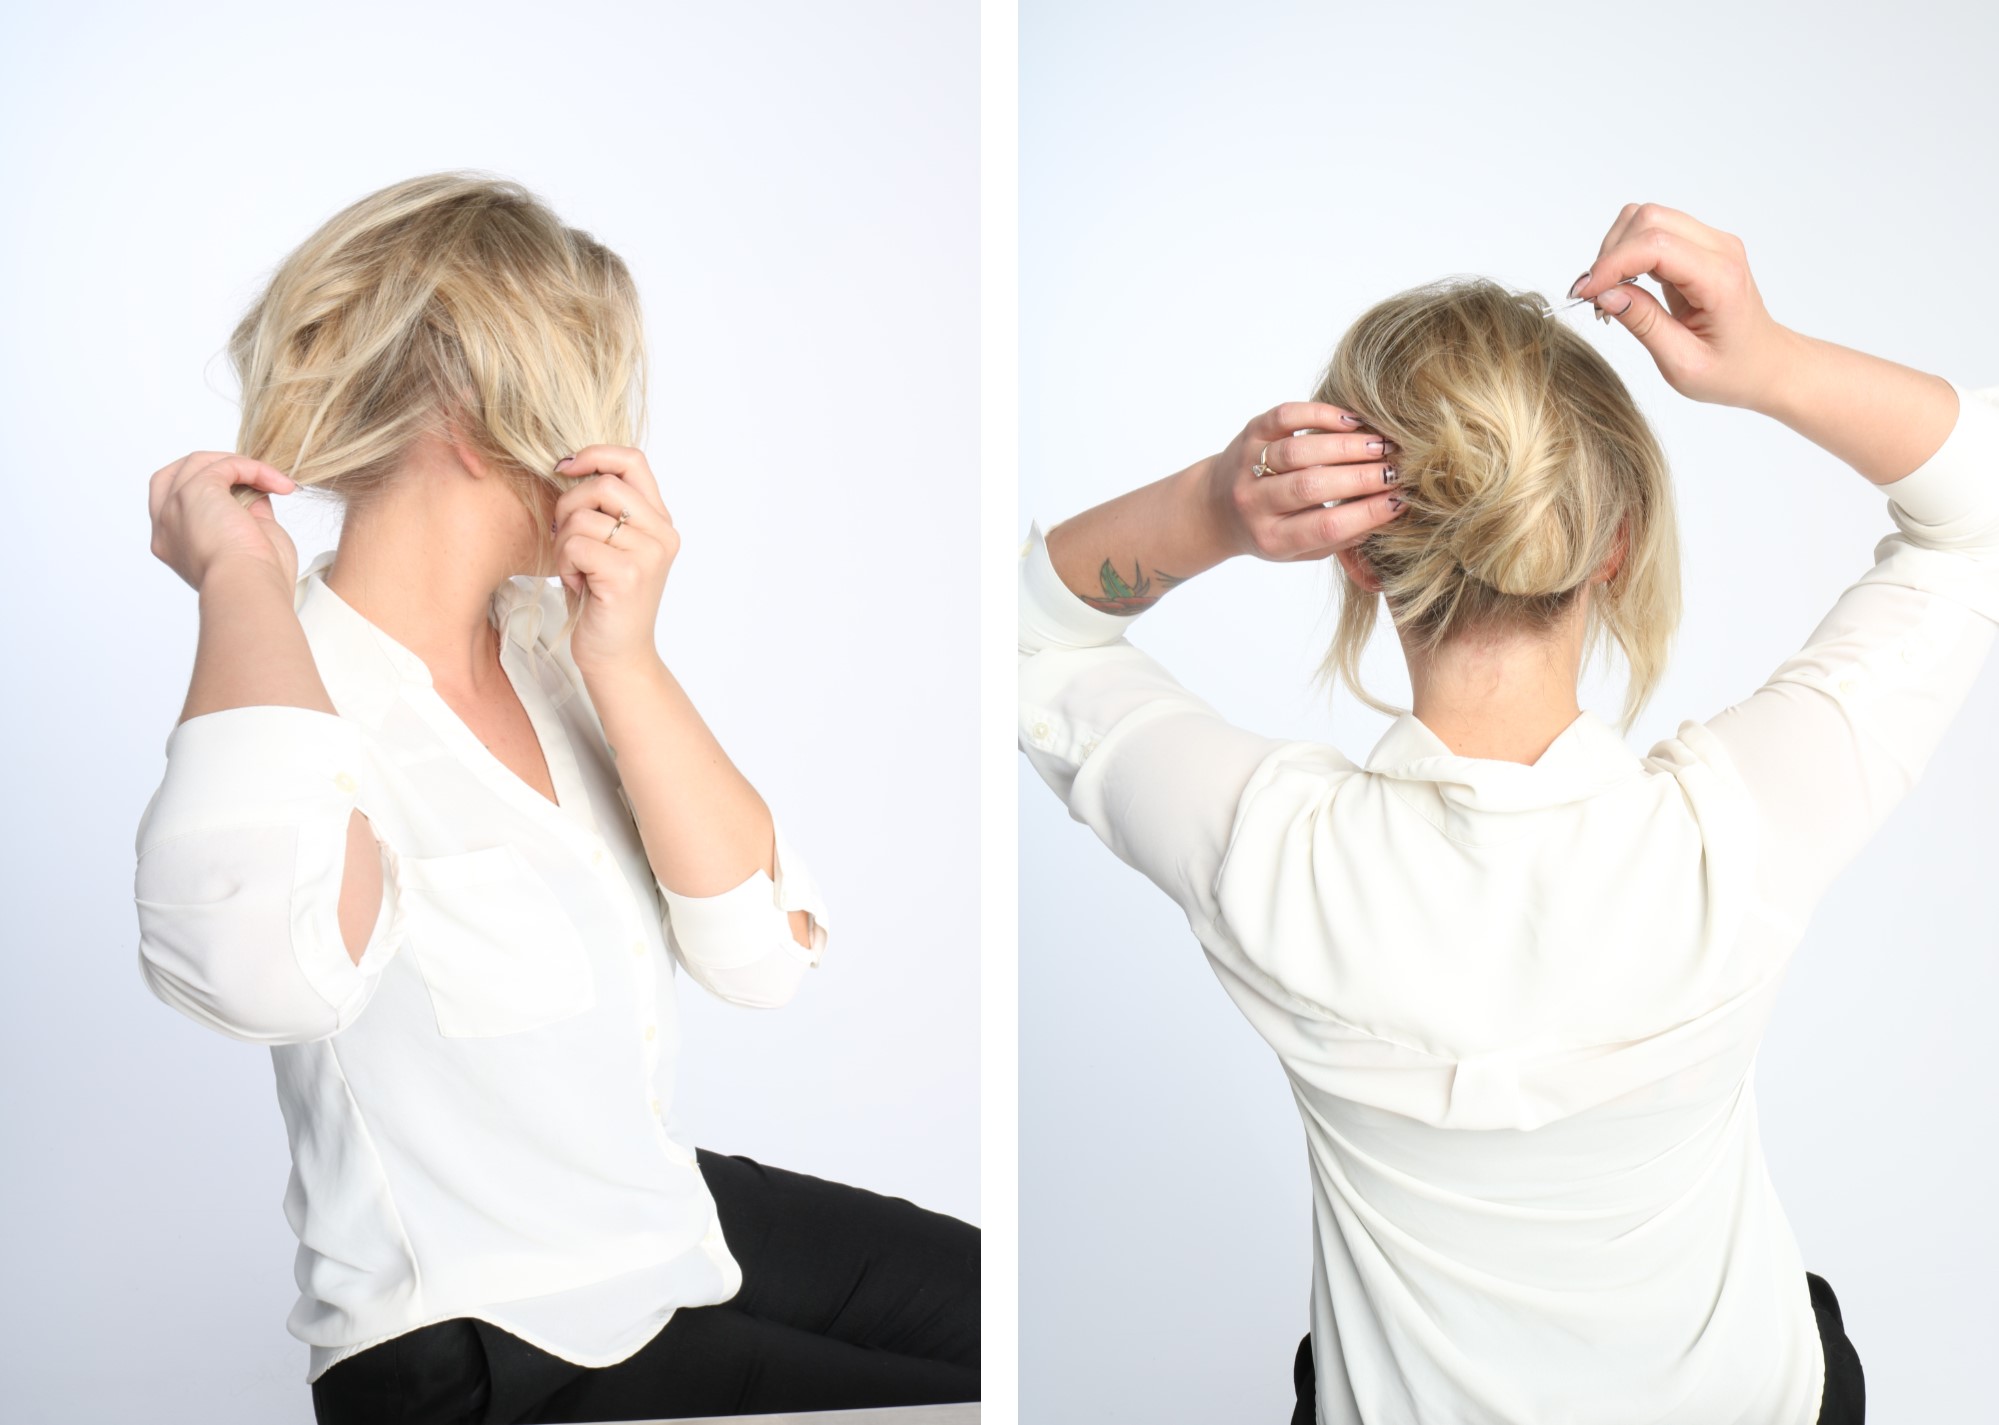 hannah, chignon, stylist, master, aveda, professional, office, hair, hairstyle, step by step